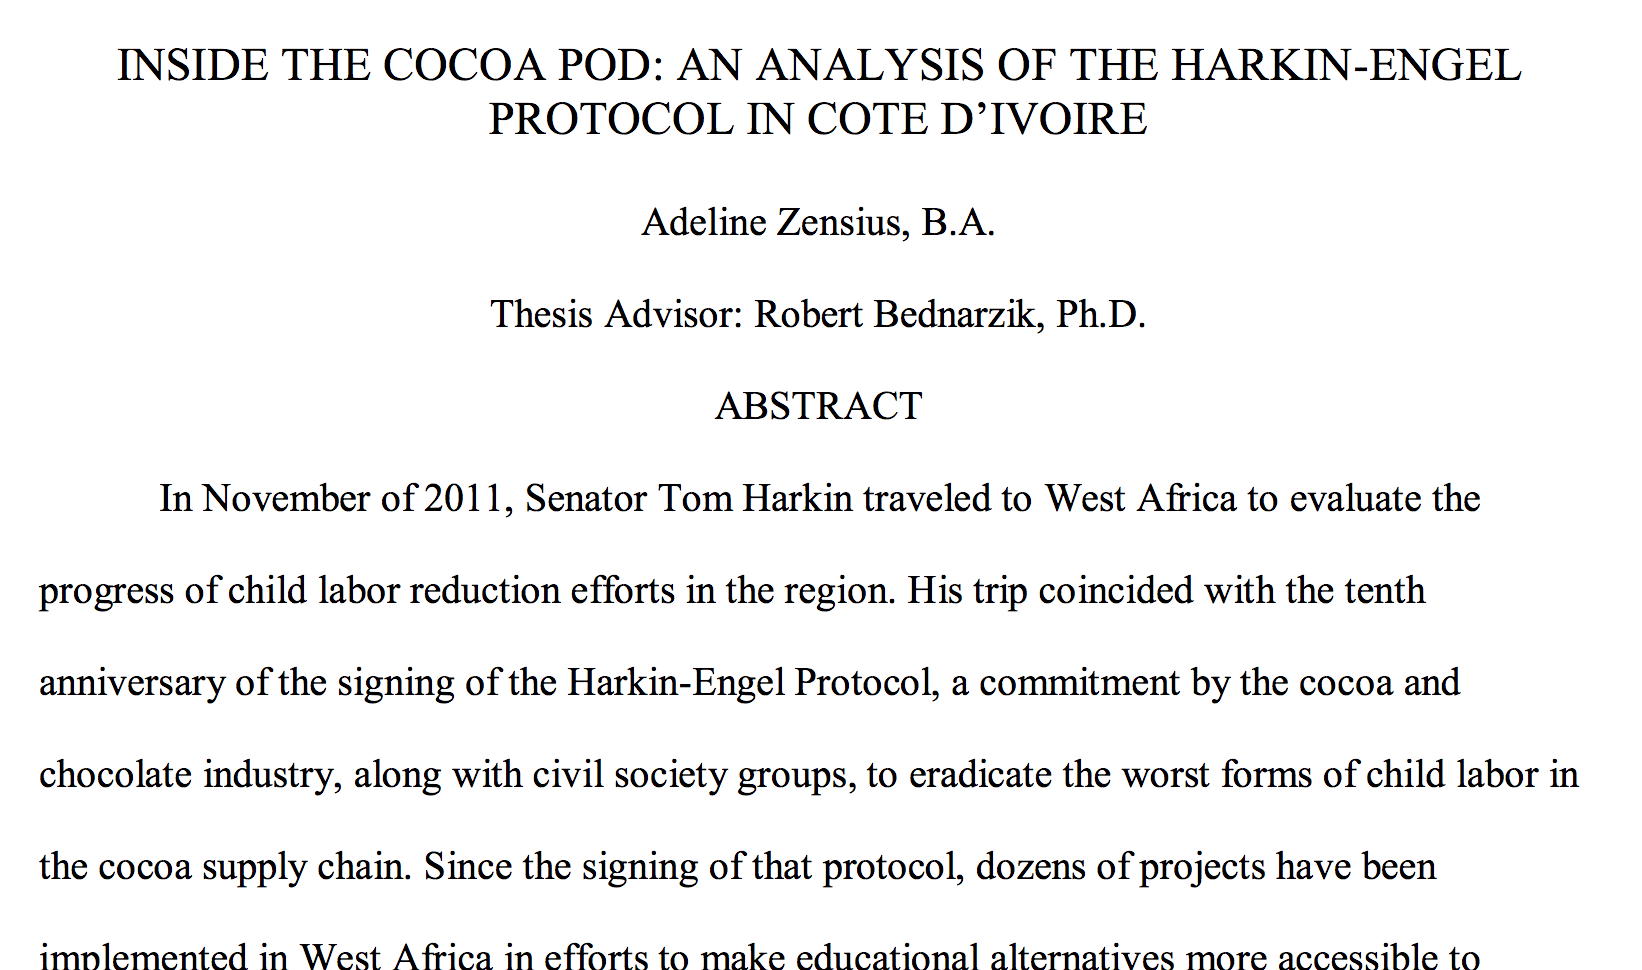 Inside the cocoa pod: an analysis of the Harkin-Engel protocol in Côte d’Ivoire